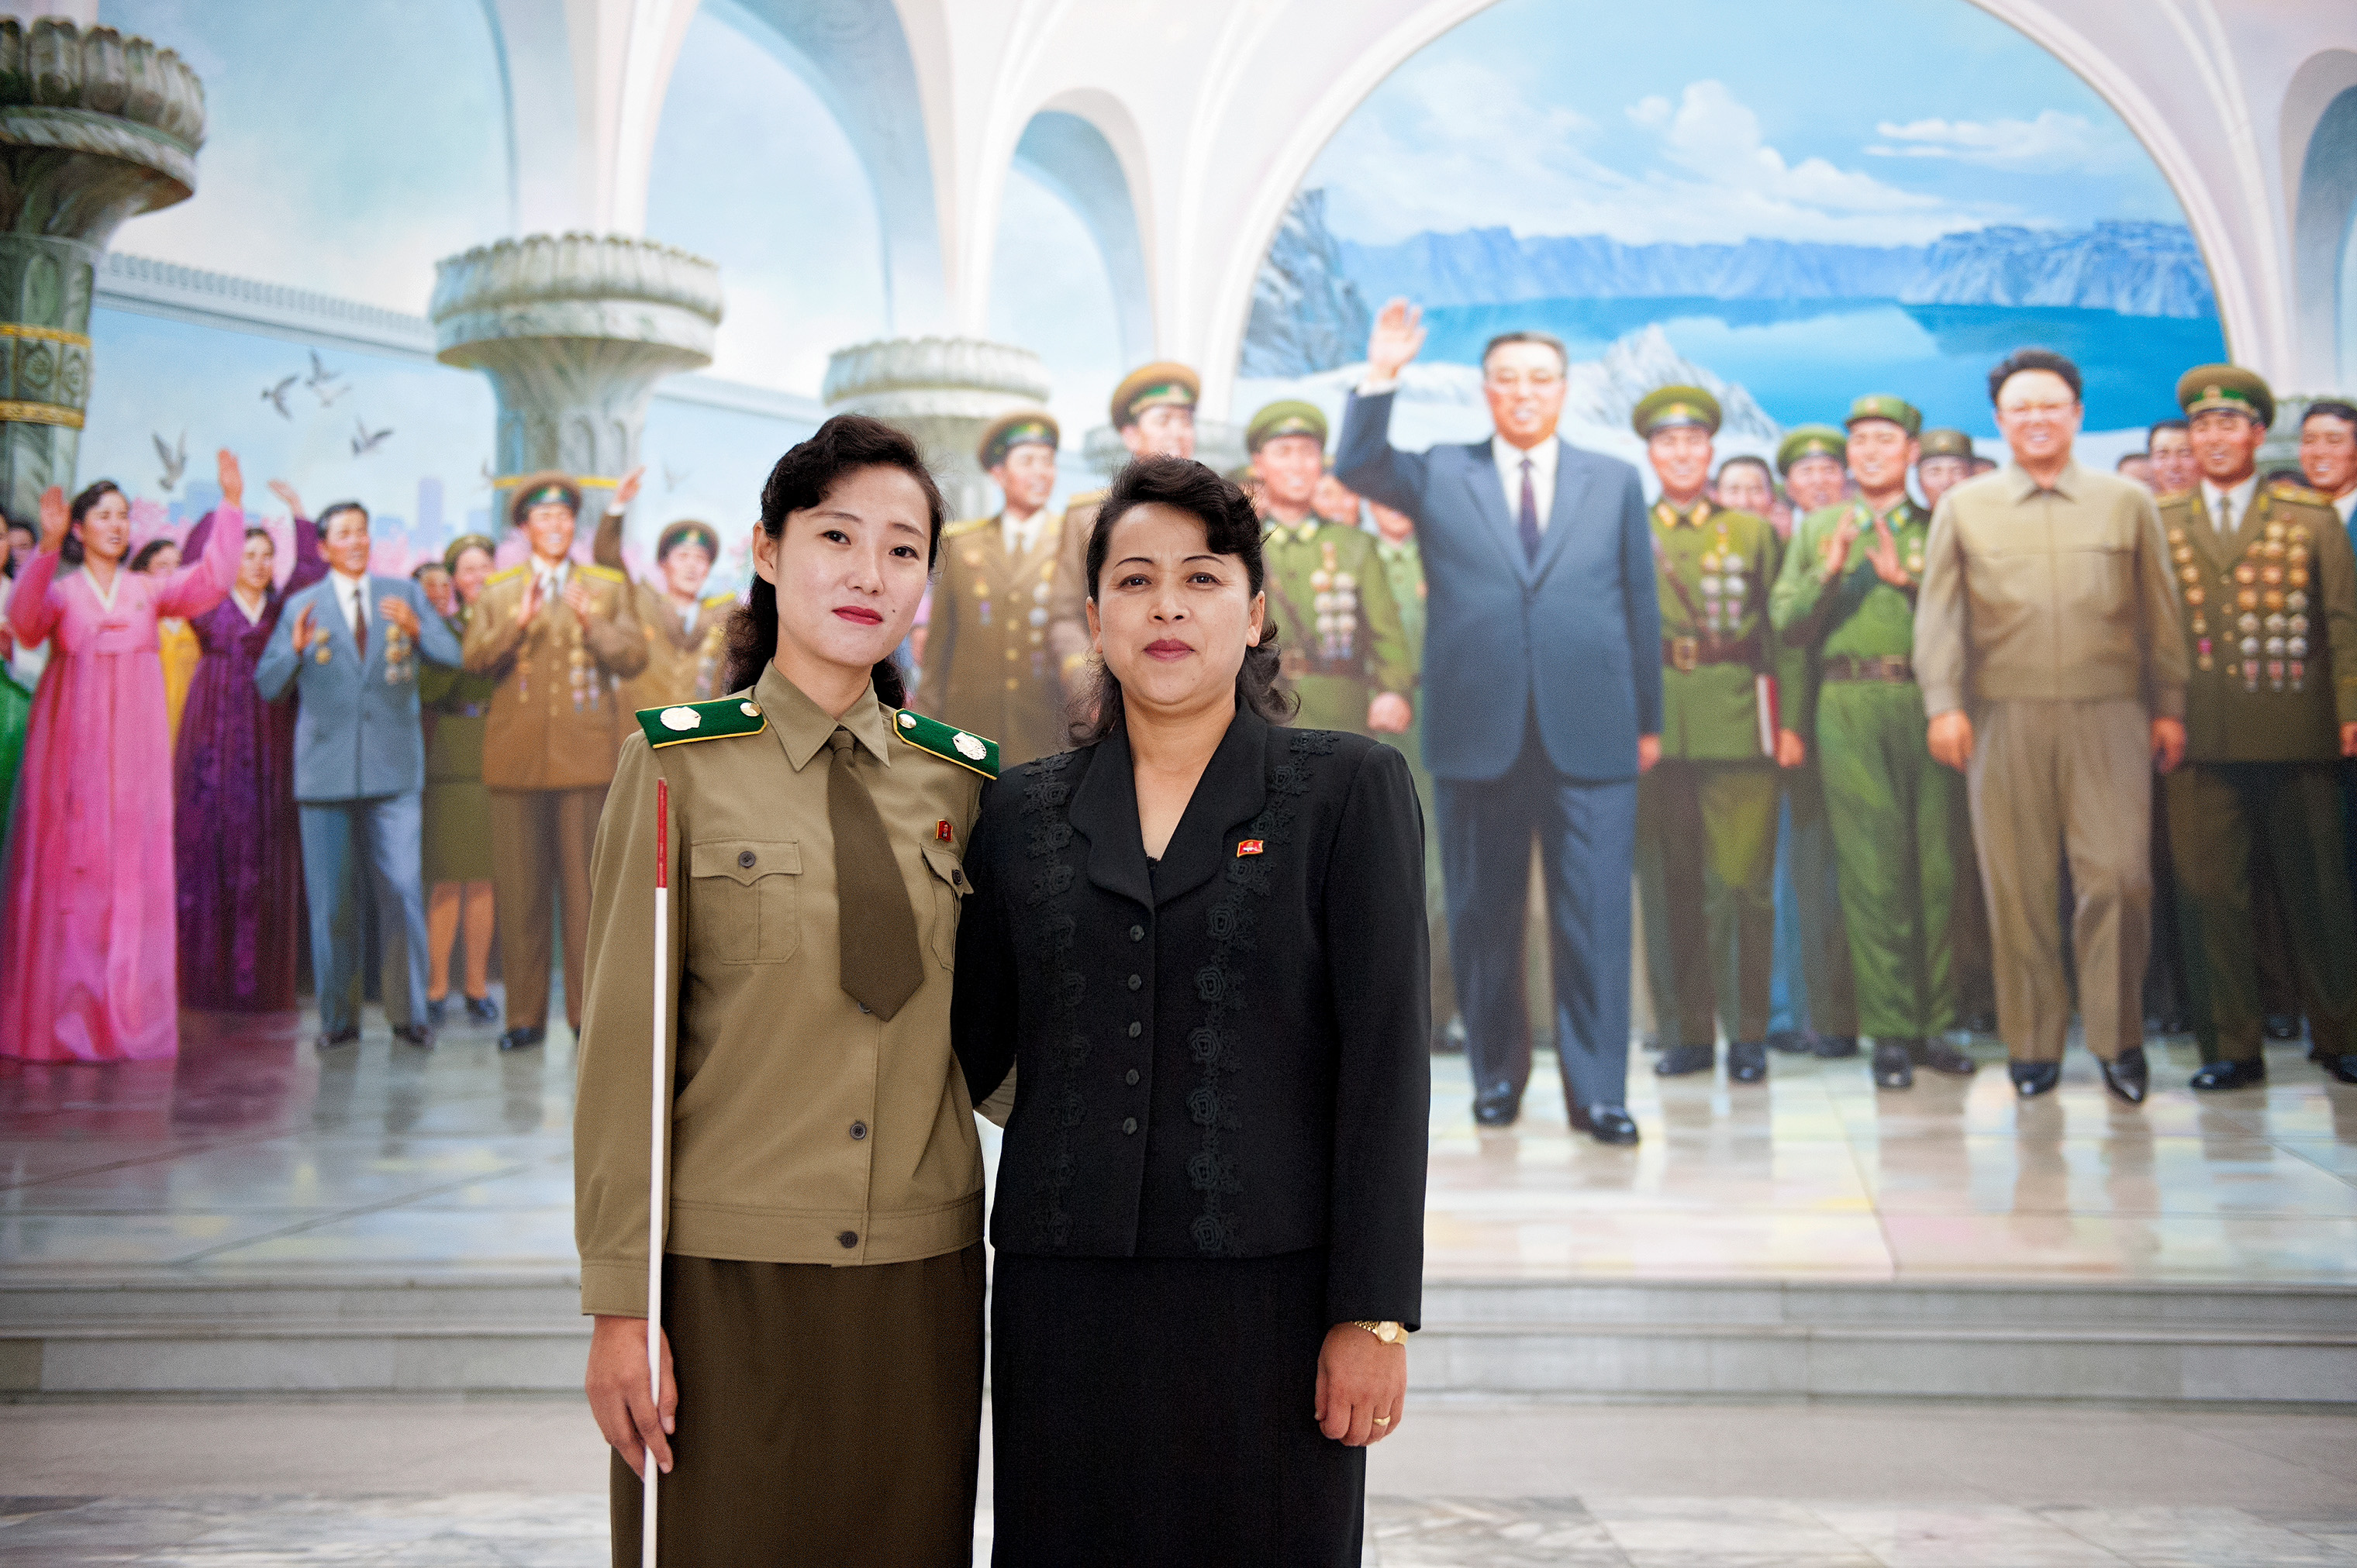 Two local guides pose in front of a mural in Pyongyang. (Werner Kranwetvogel)